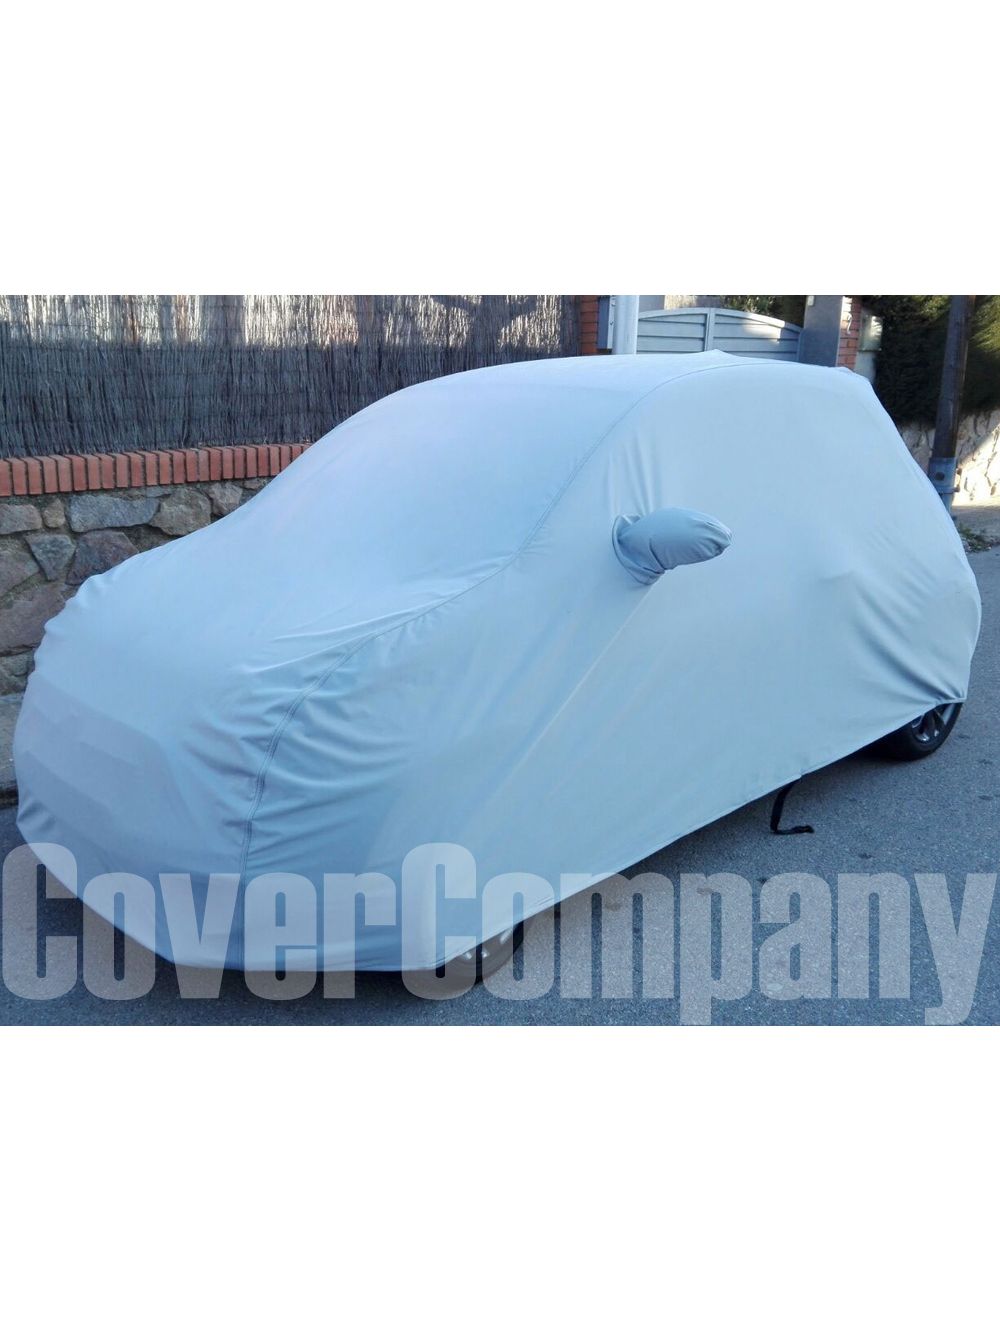 Outdoor Car Cover for Abarth. Waterproof Tailored Car Cover